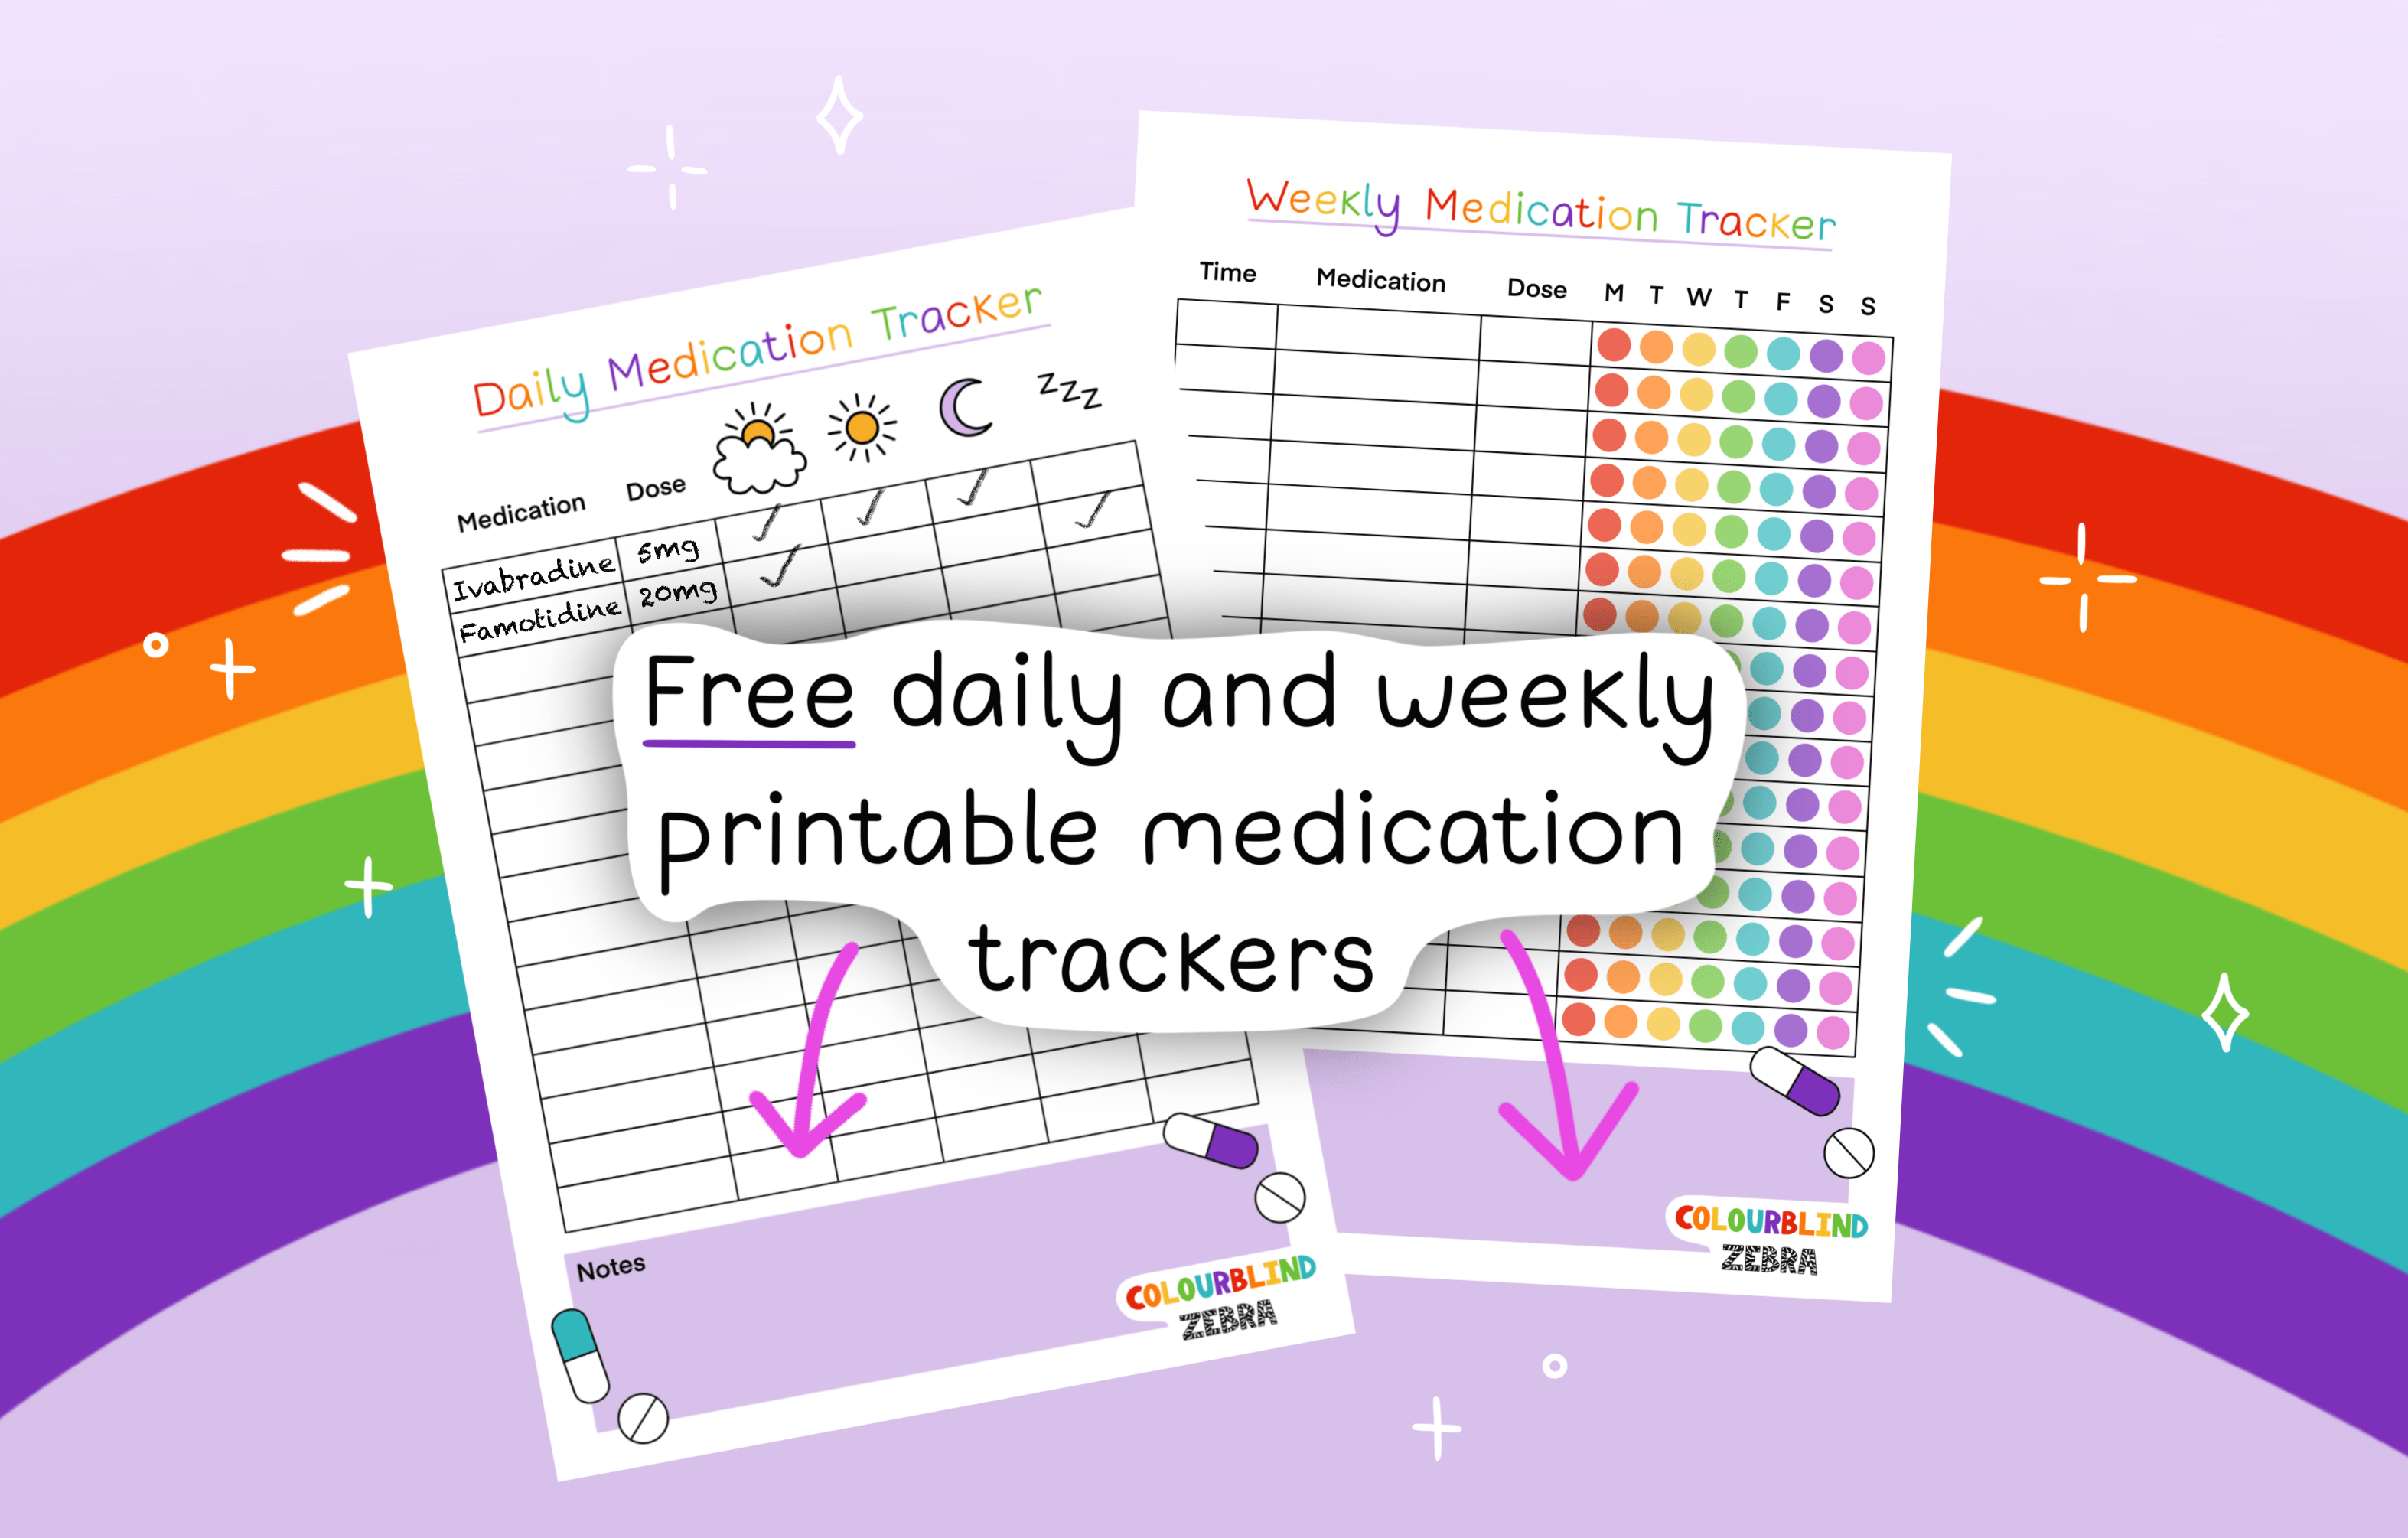 Free daily and weekly printable medication trackers when you subscribe to the email newsletter.